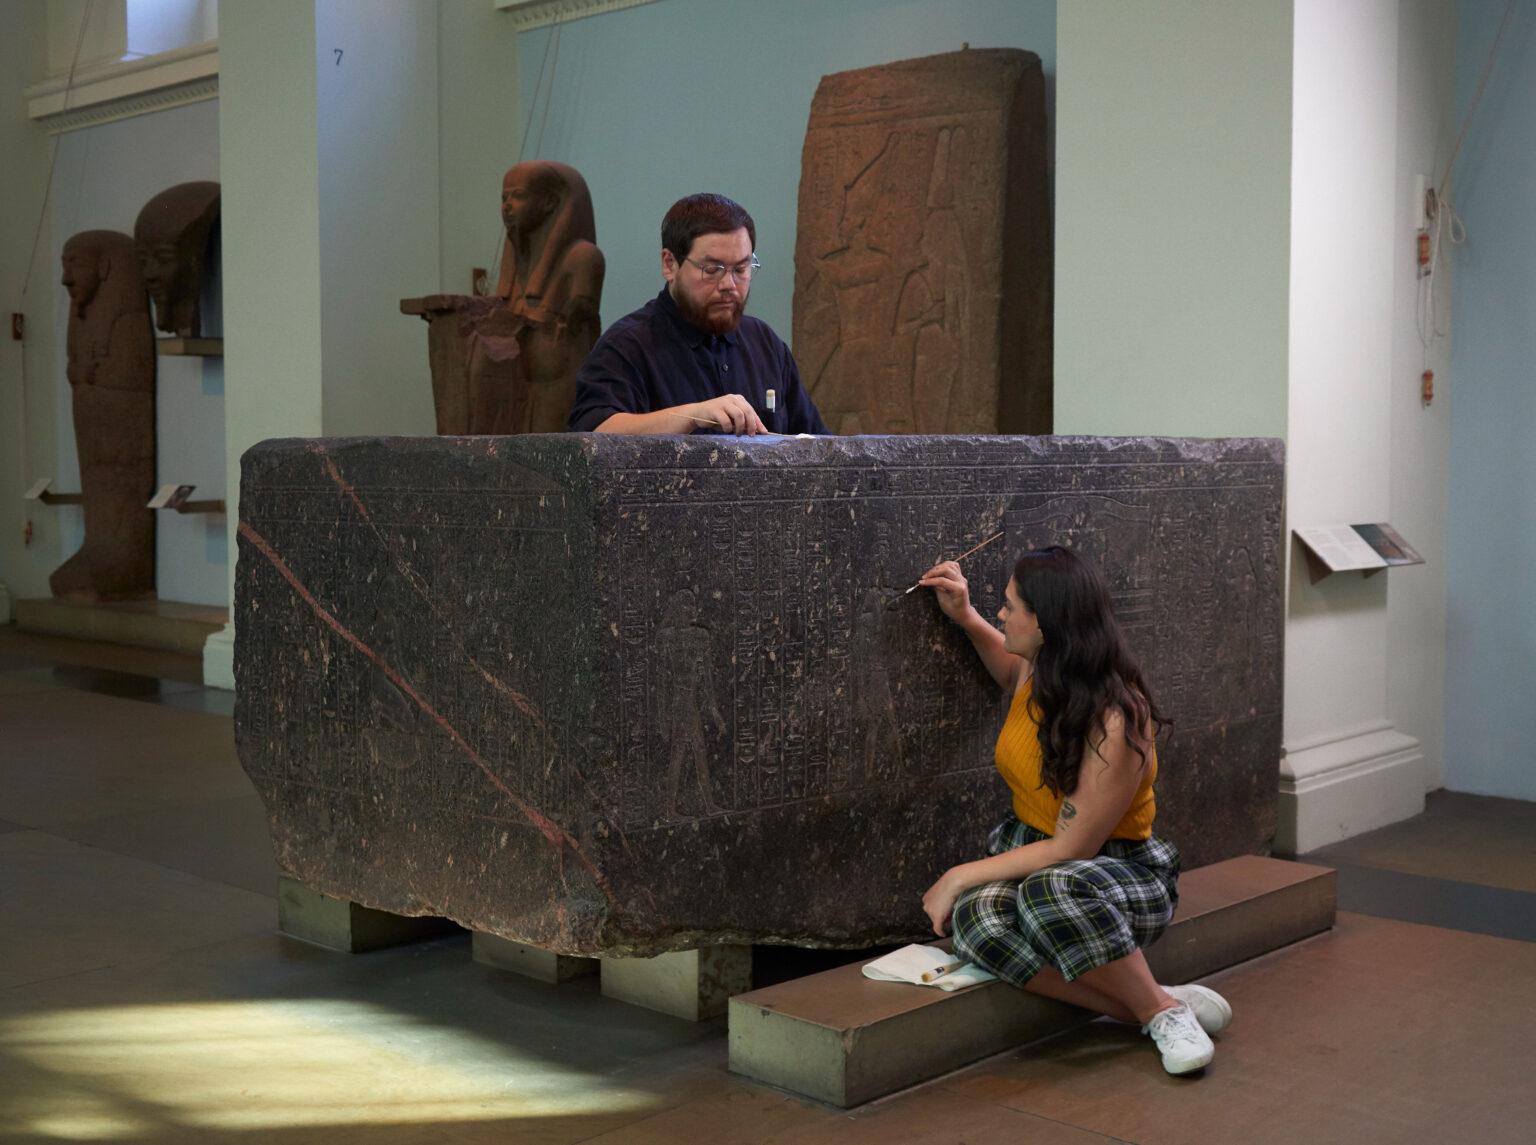 Senior conservator stephanie vasiliou and conservation student shoun obana cleans the enchanted basin at the british museum 1536x1145